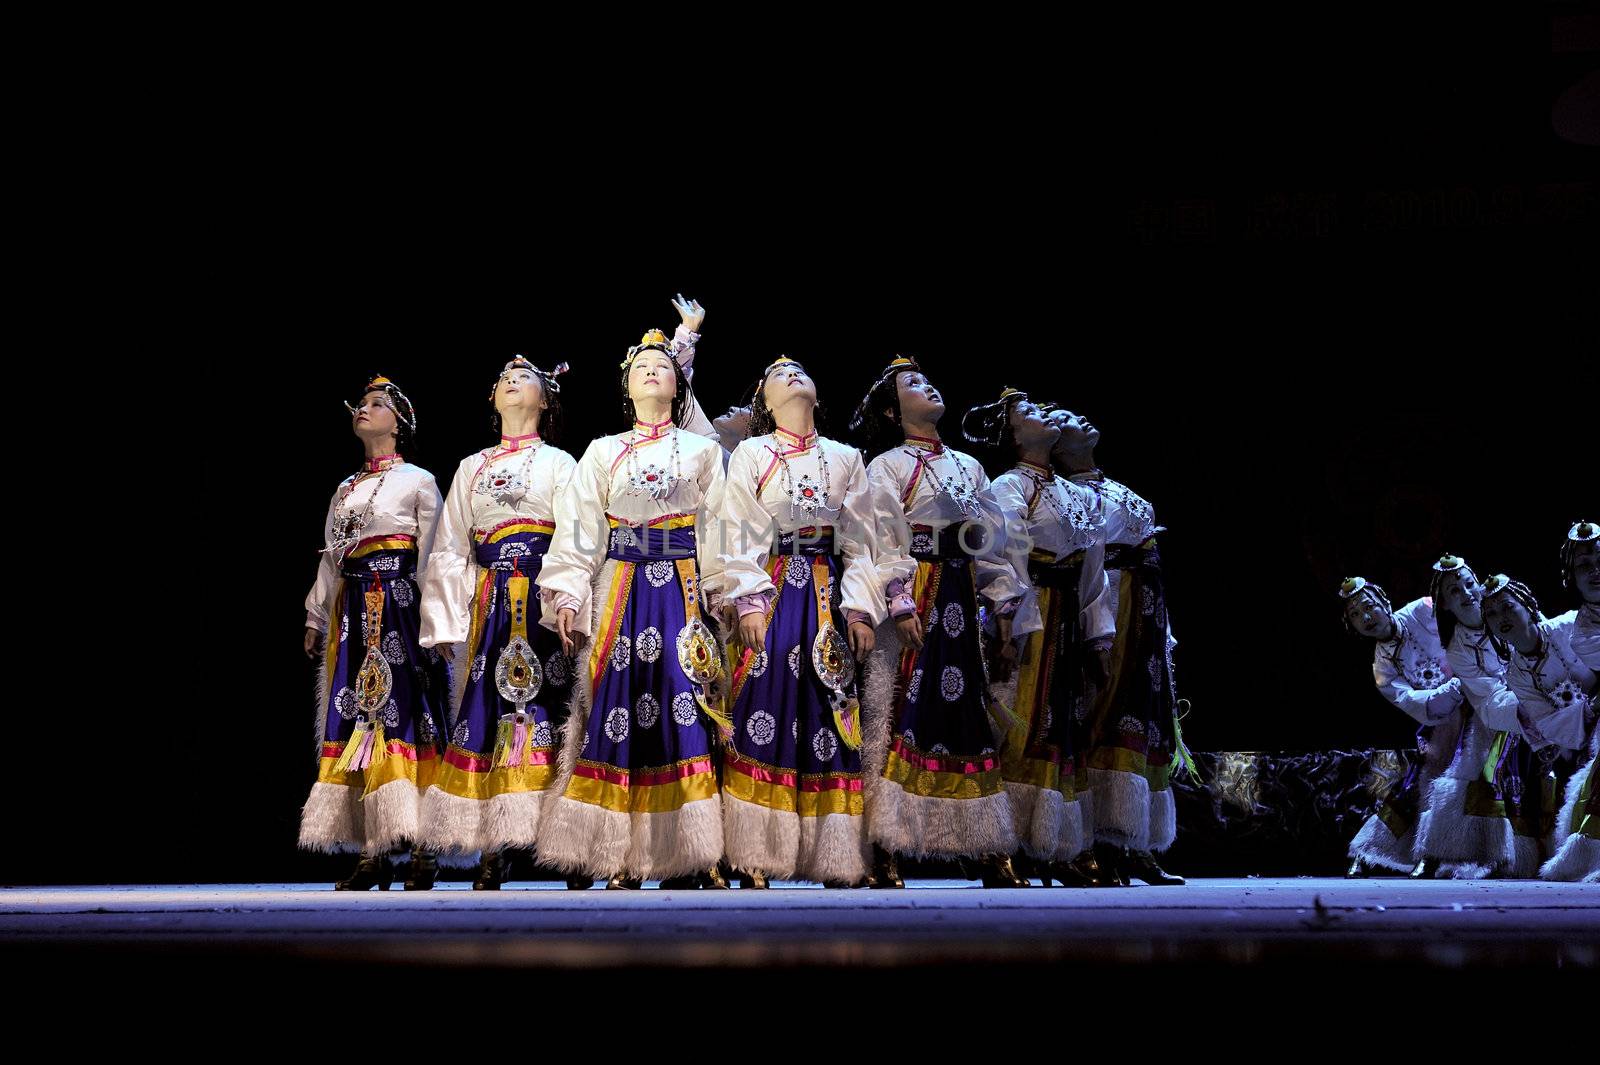 CHENGDU - SEP 28: chinese Tibetan ethnic dancers perform on stage in the 6th Sichuan minority nationality culture festival at JINJIANG theater.Sep 28,2010 in Chengdu, China.